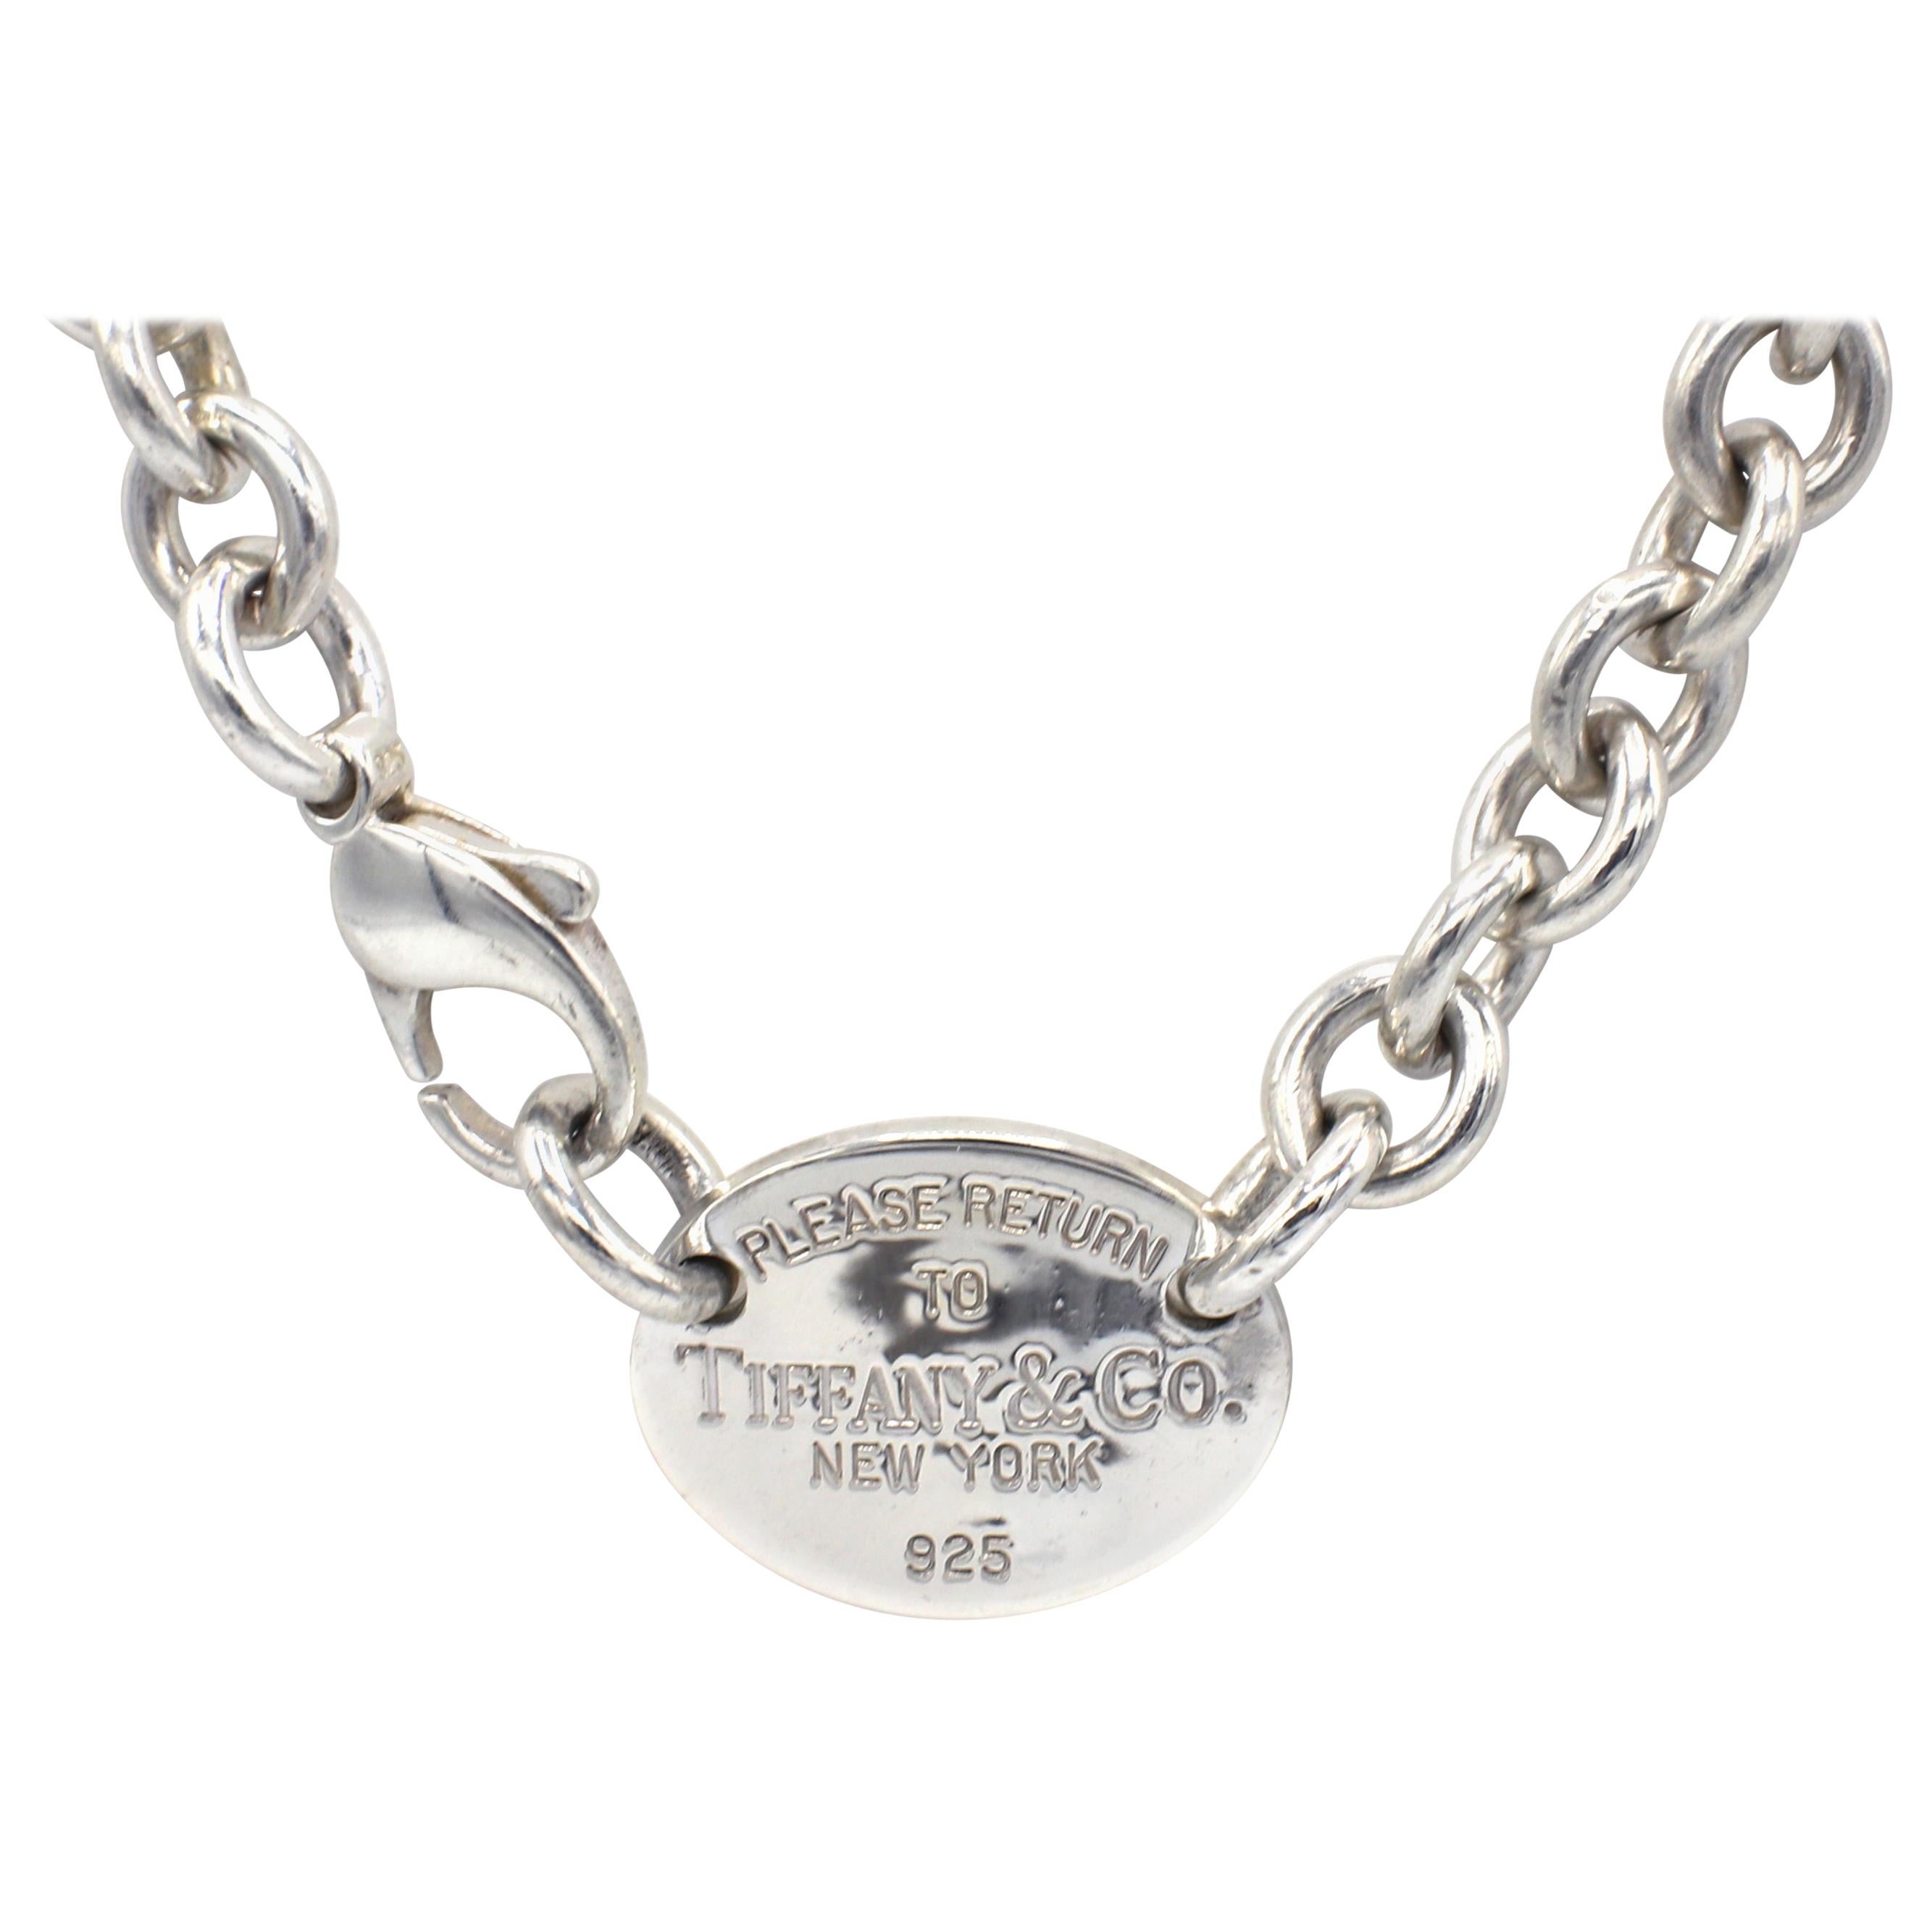 Tiffany and Co. Sterling Silver 1837 Lock Necklace at 1stDibs